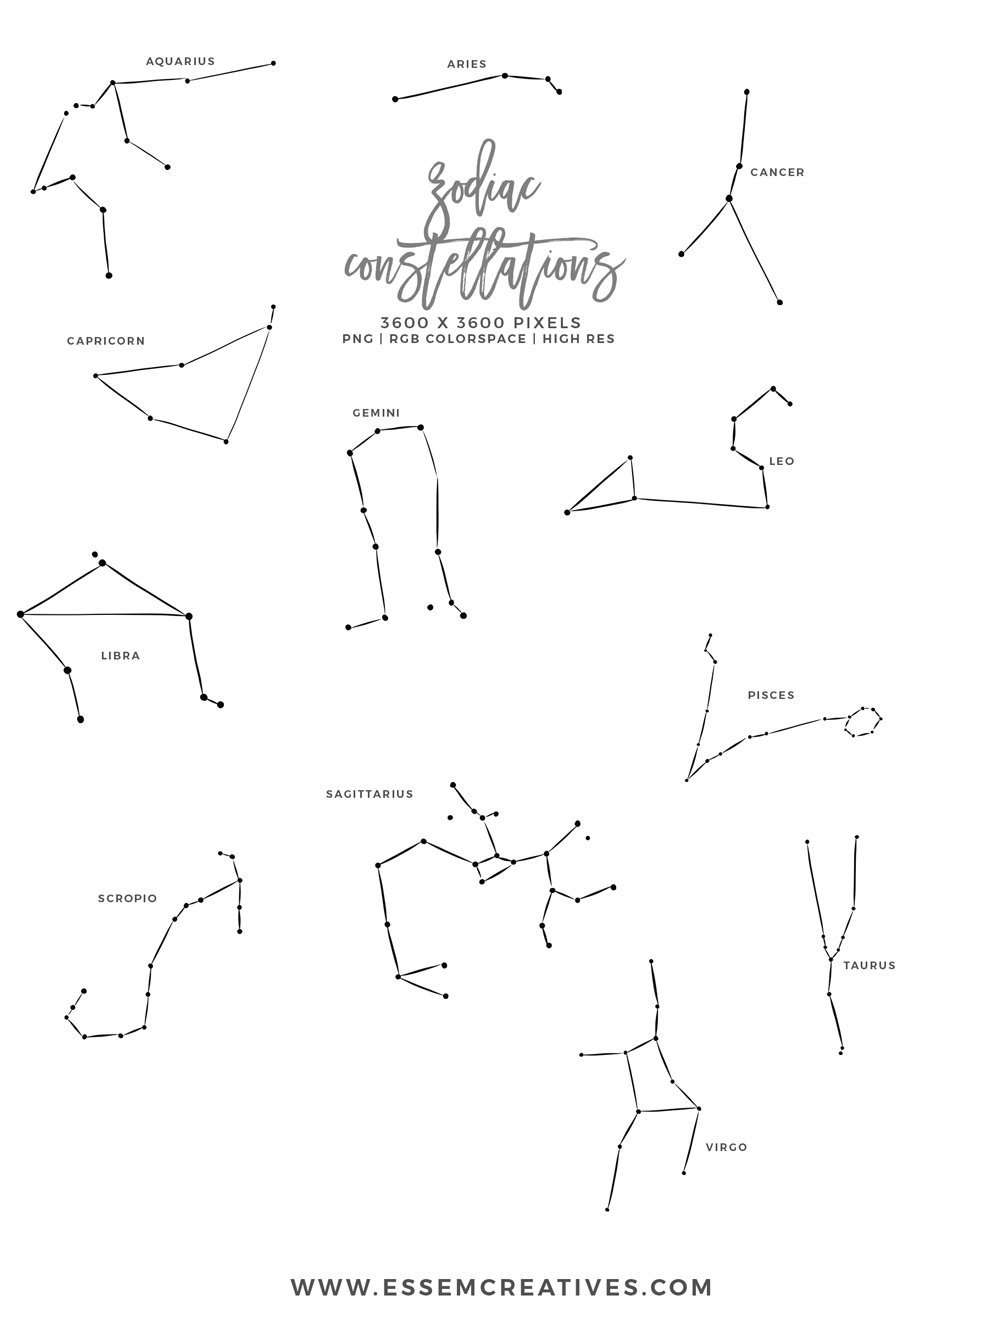 constellations - Clip Art Library